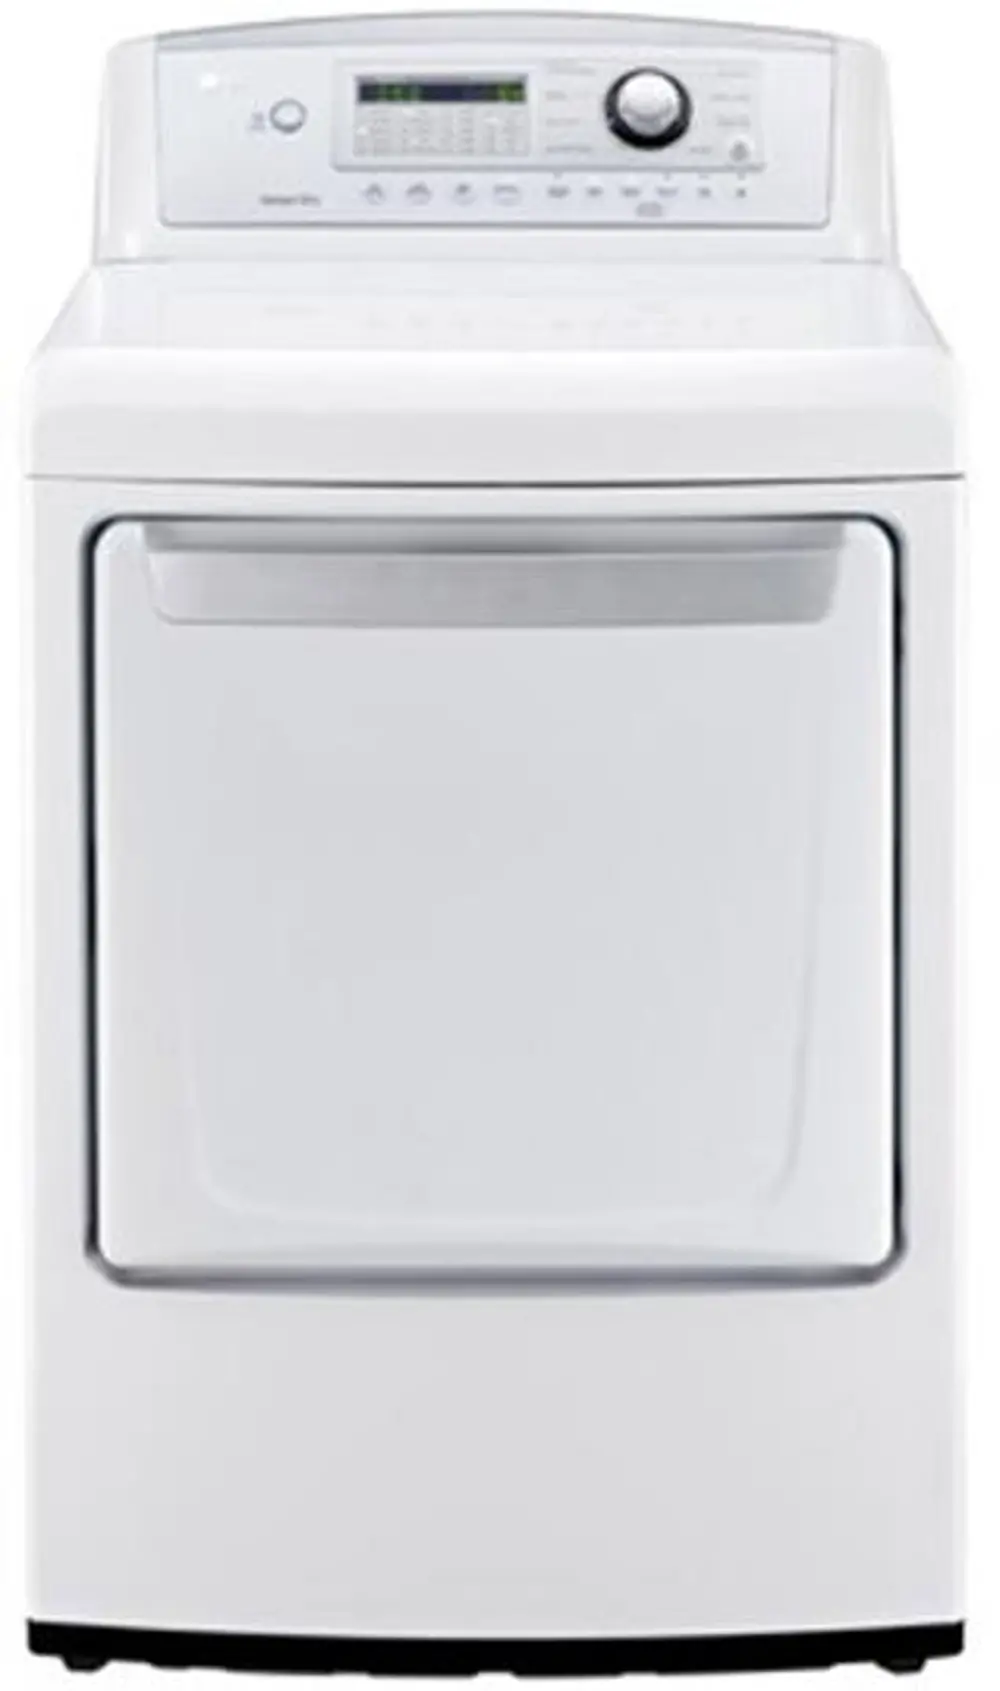 DLE4970W LG White 7.3 cu. ft. Electric Dryer-1